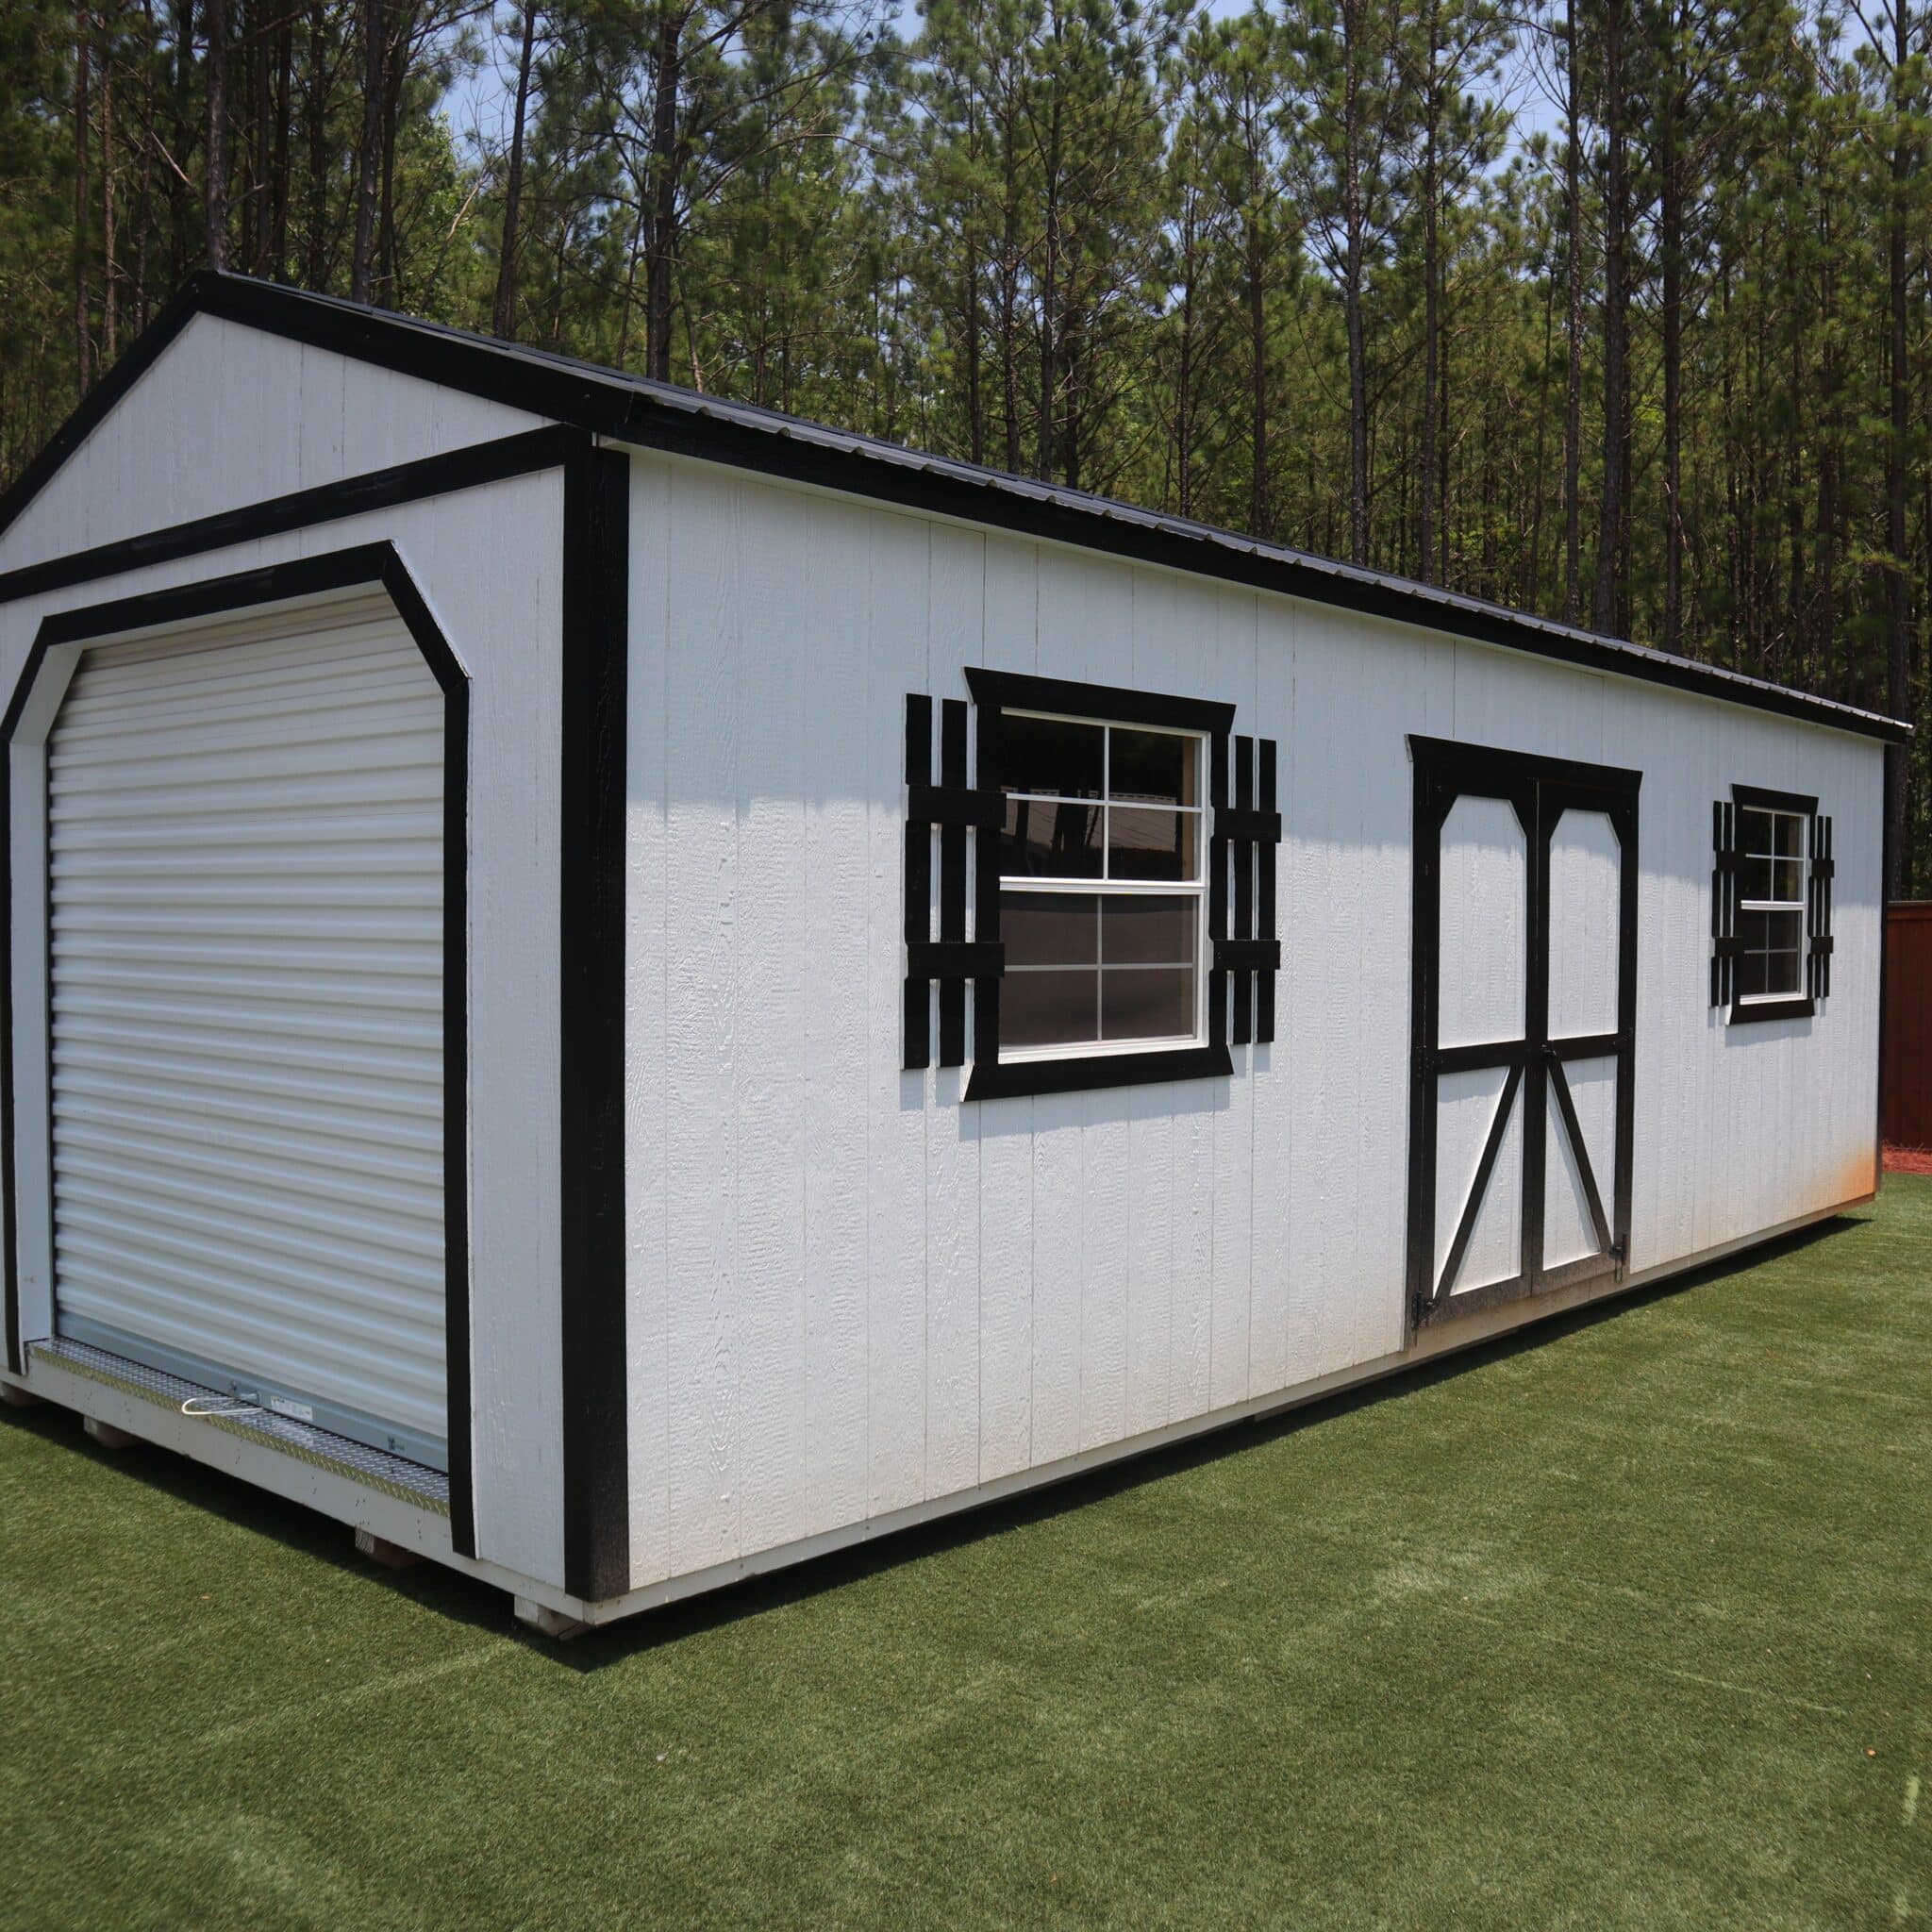 OutdoorOptions Eatonton Georgia 31024 Shed Picture Replace 26 Storage For Your Life Outdoor Options